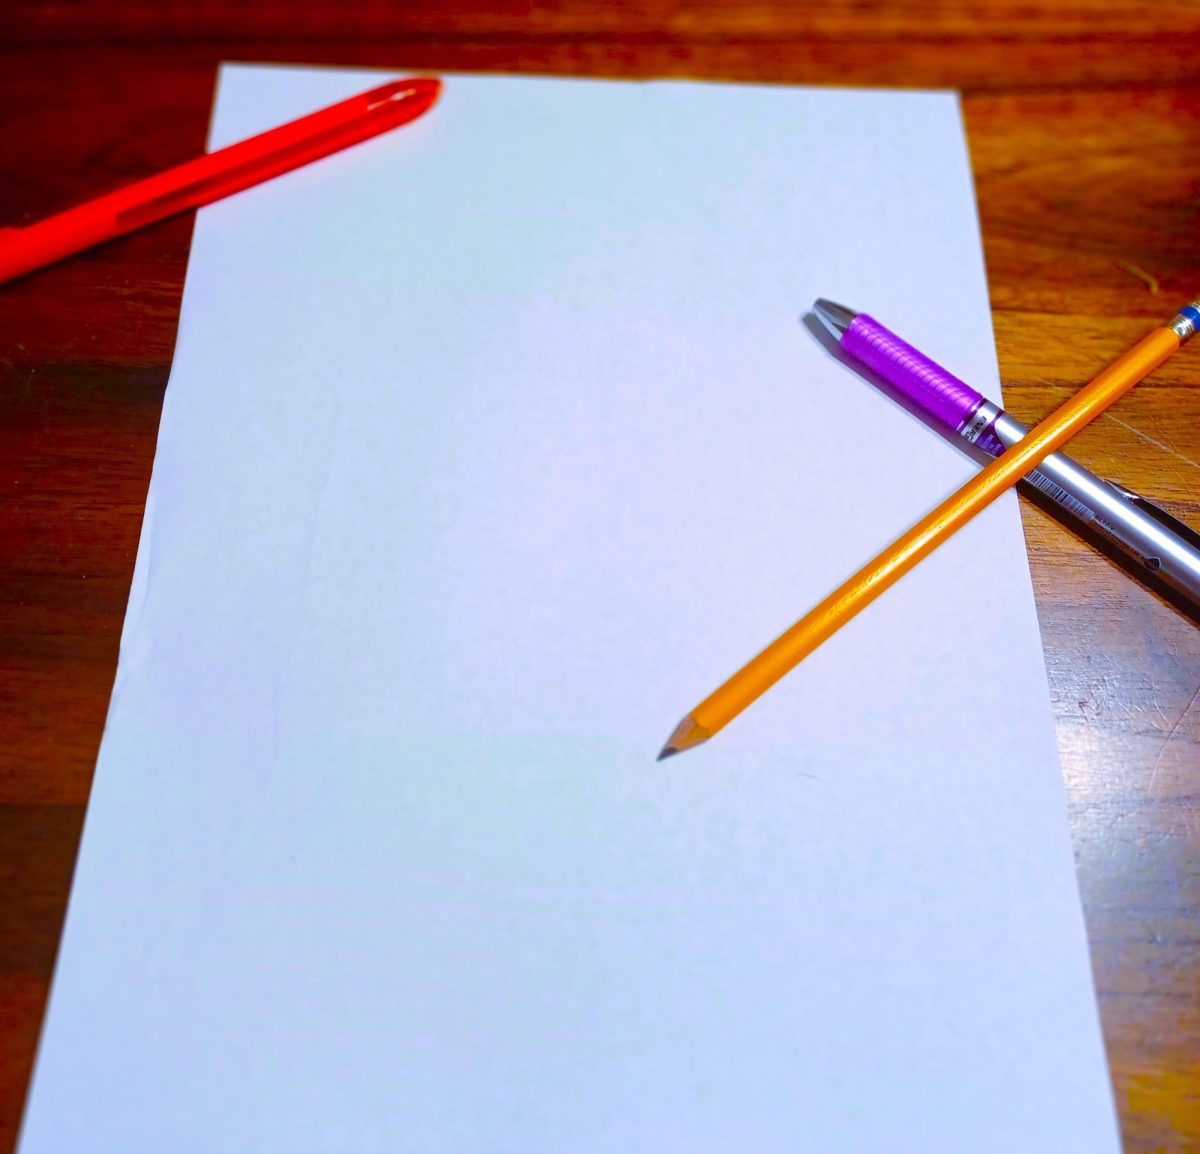 A photo of a piece of paper with writing utensils.